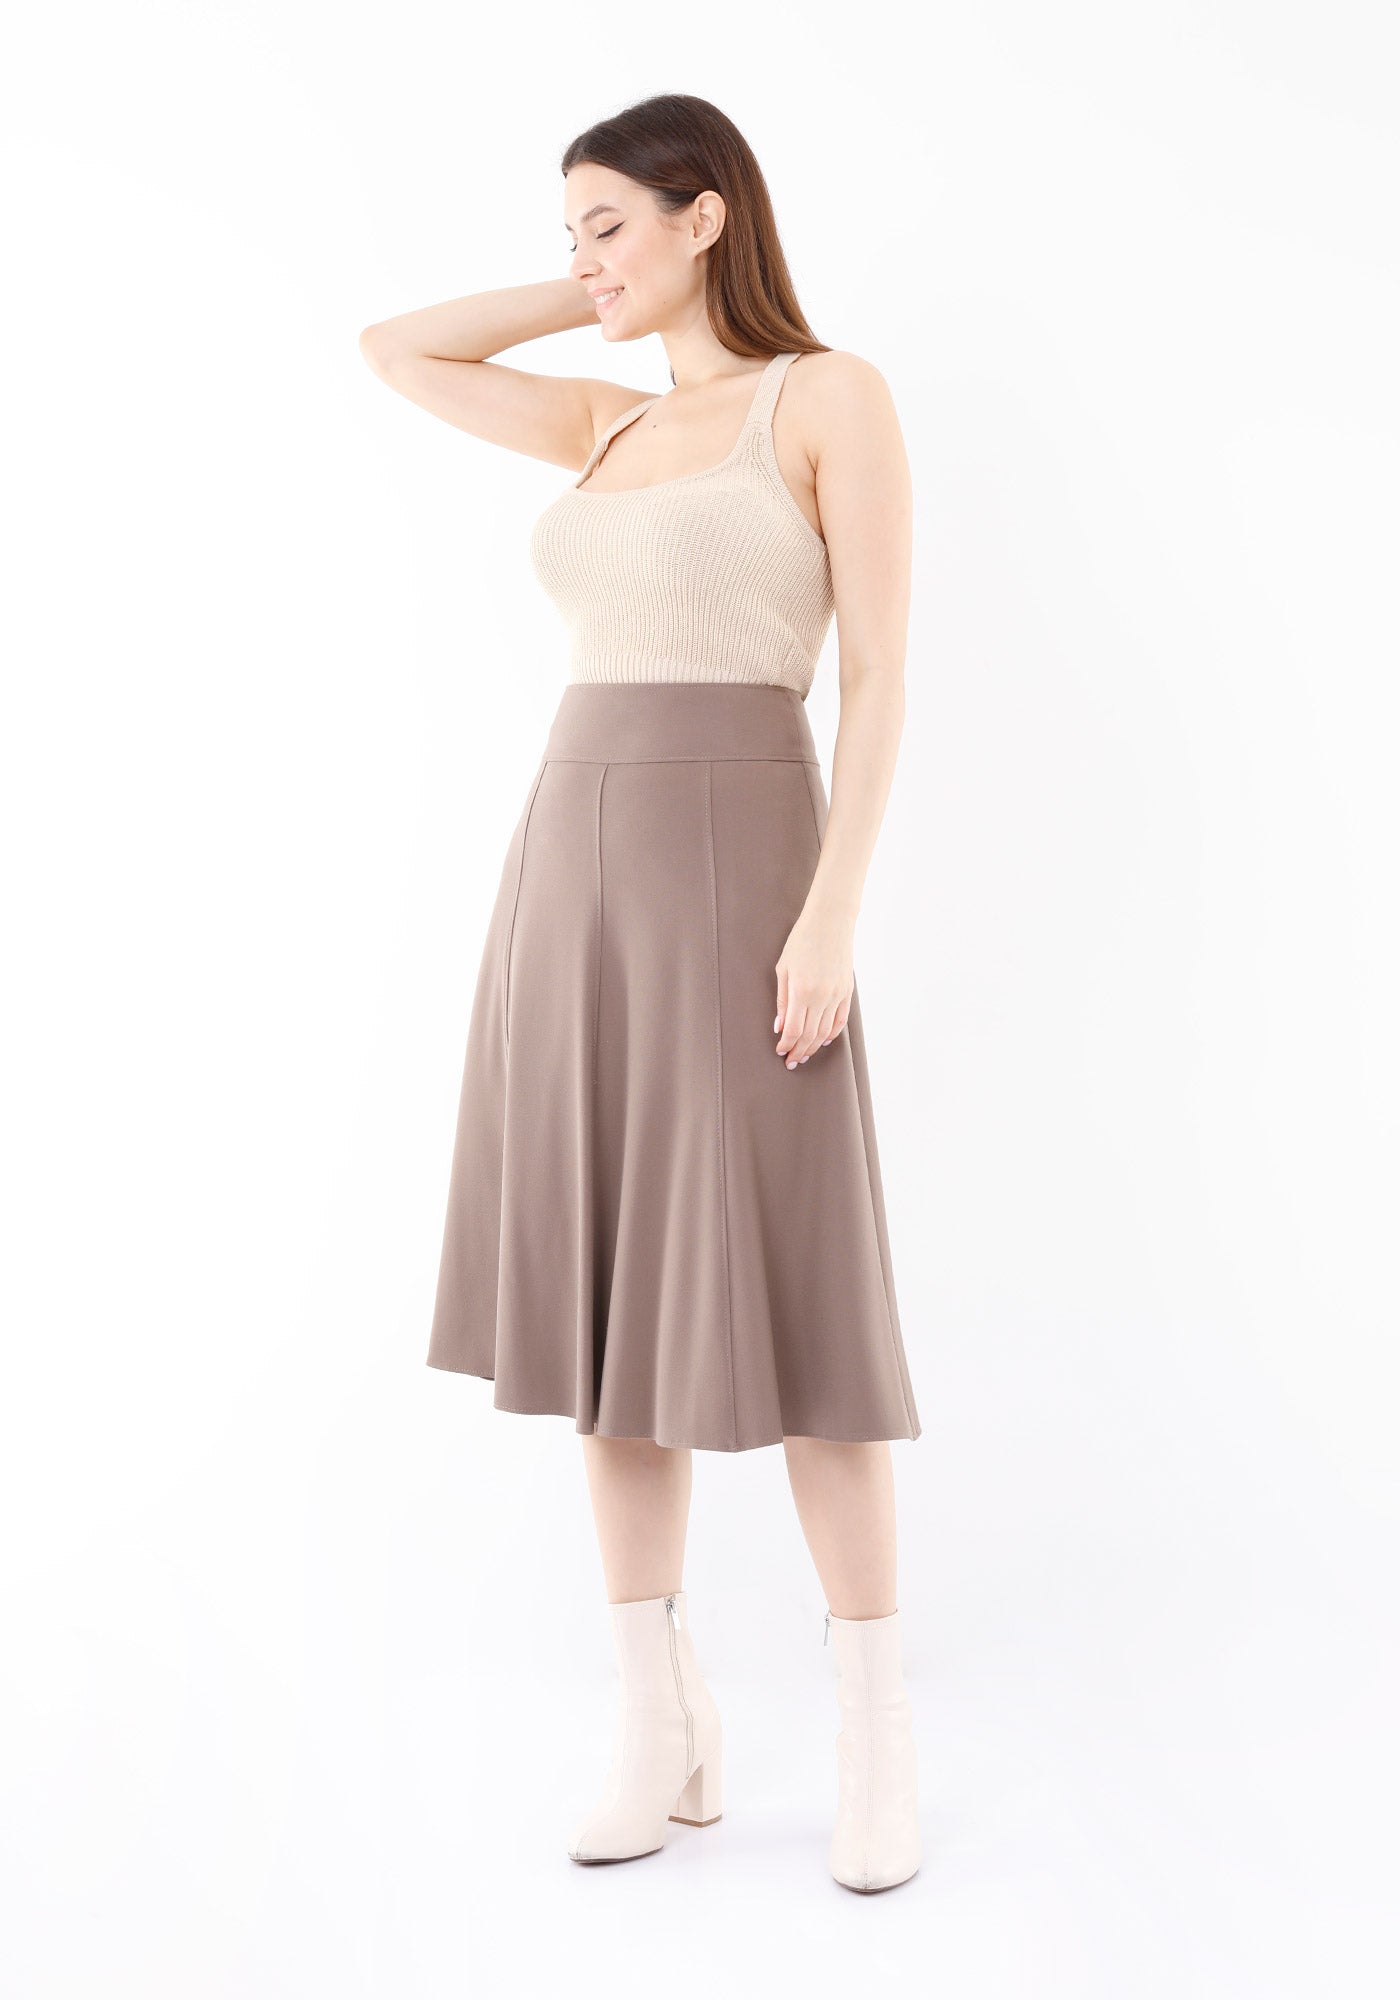 Eight Gore Calf Length Midi Skirt for Every Occasion G-Line